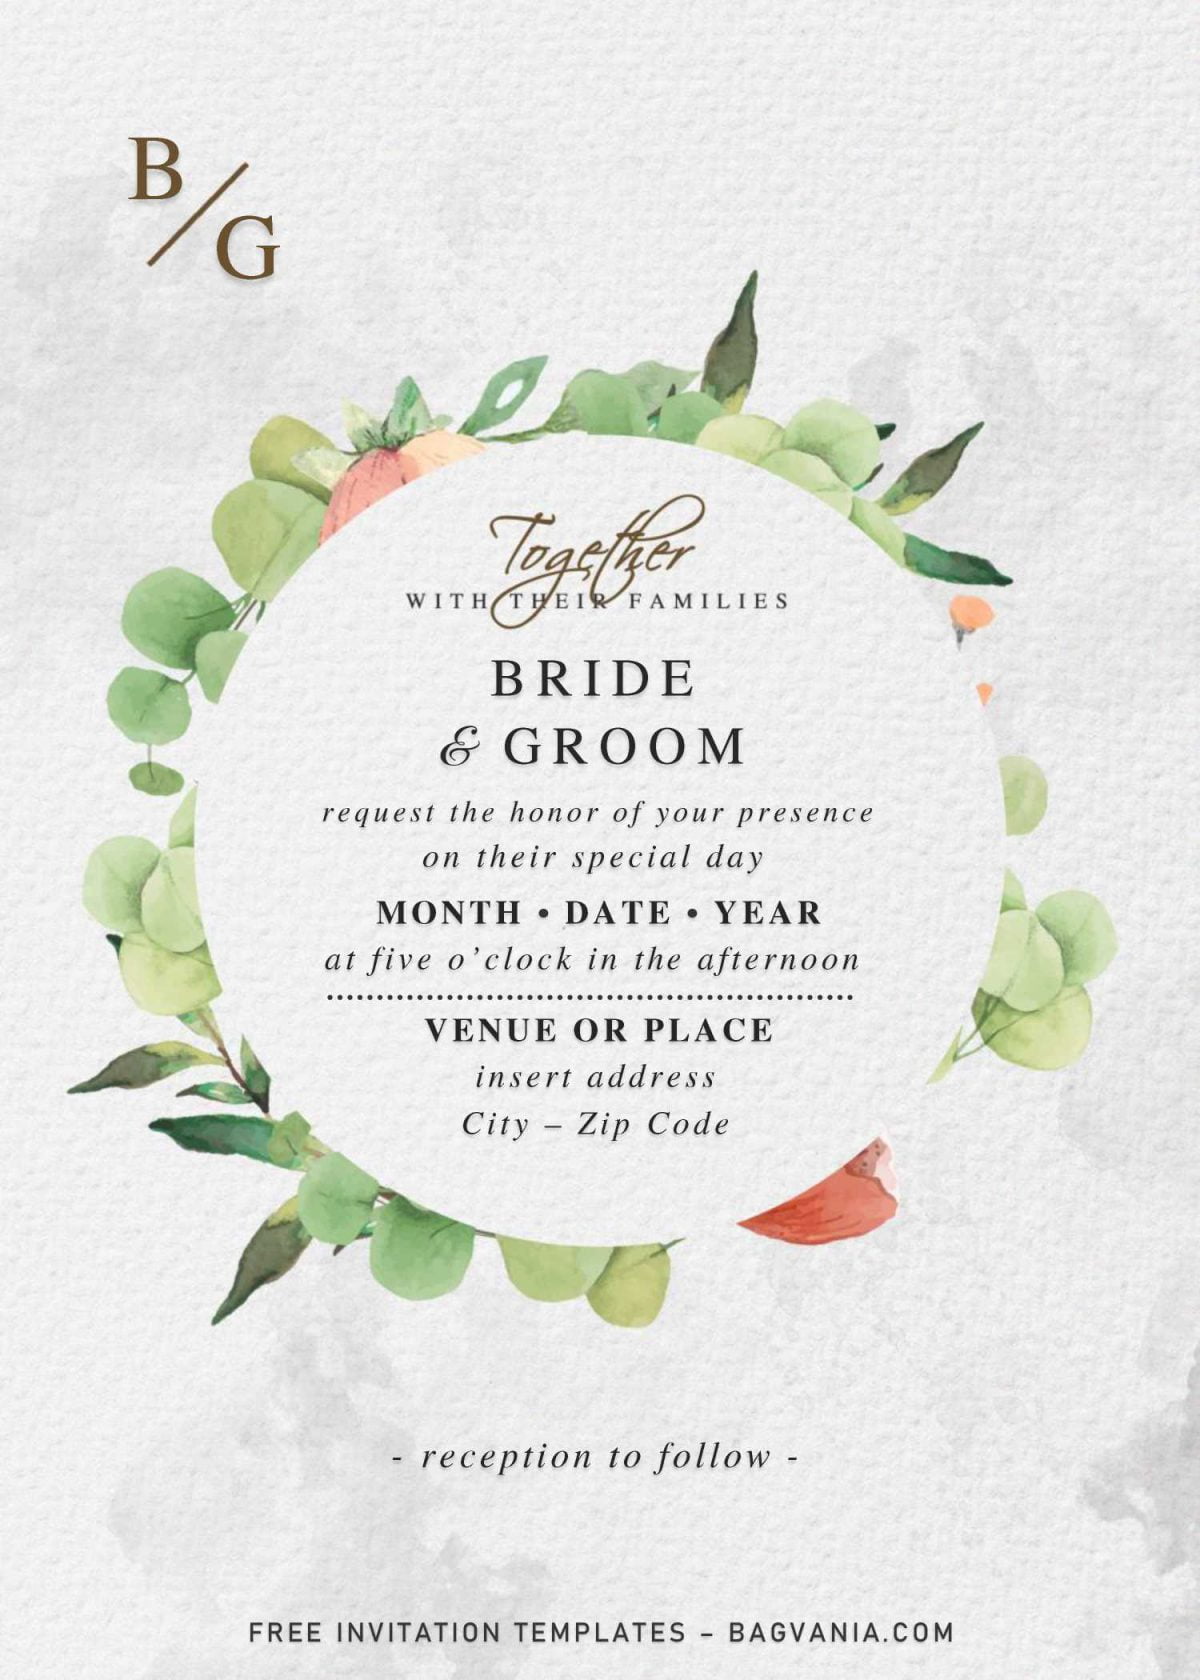 Free Vintage Floral Wedding Invitation Templates For Word and has rustic vintage style background